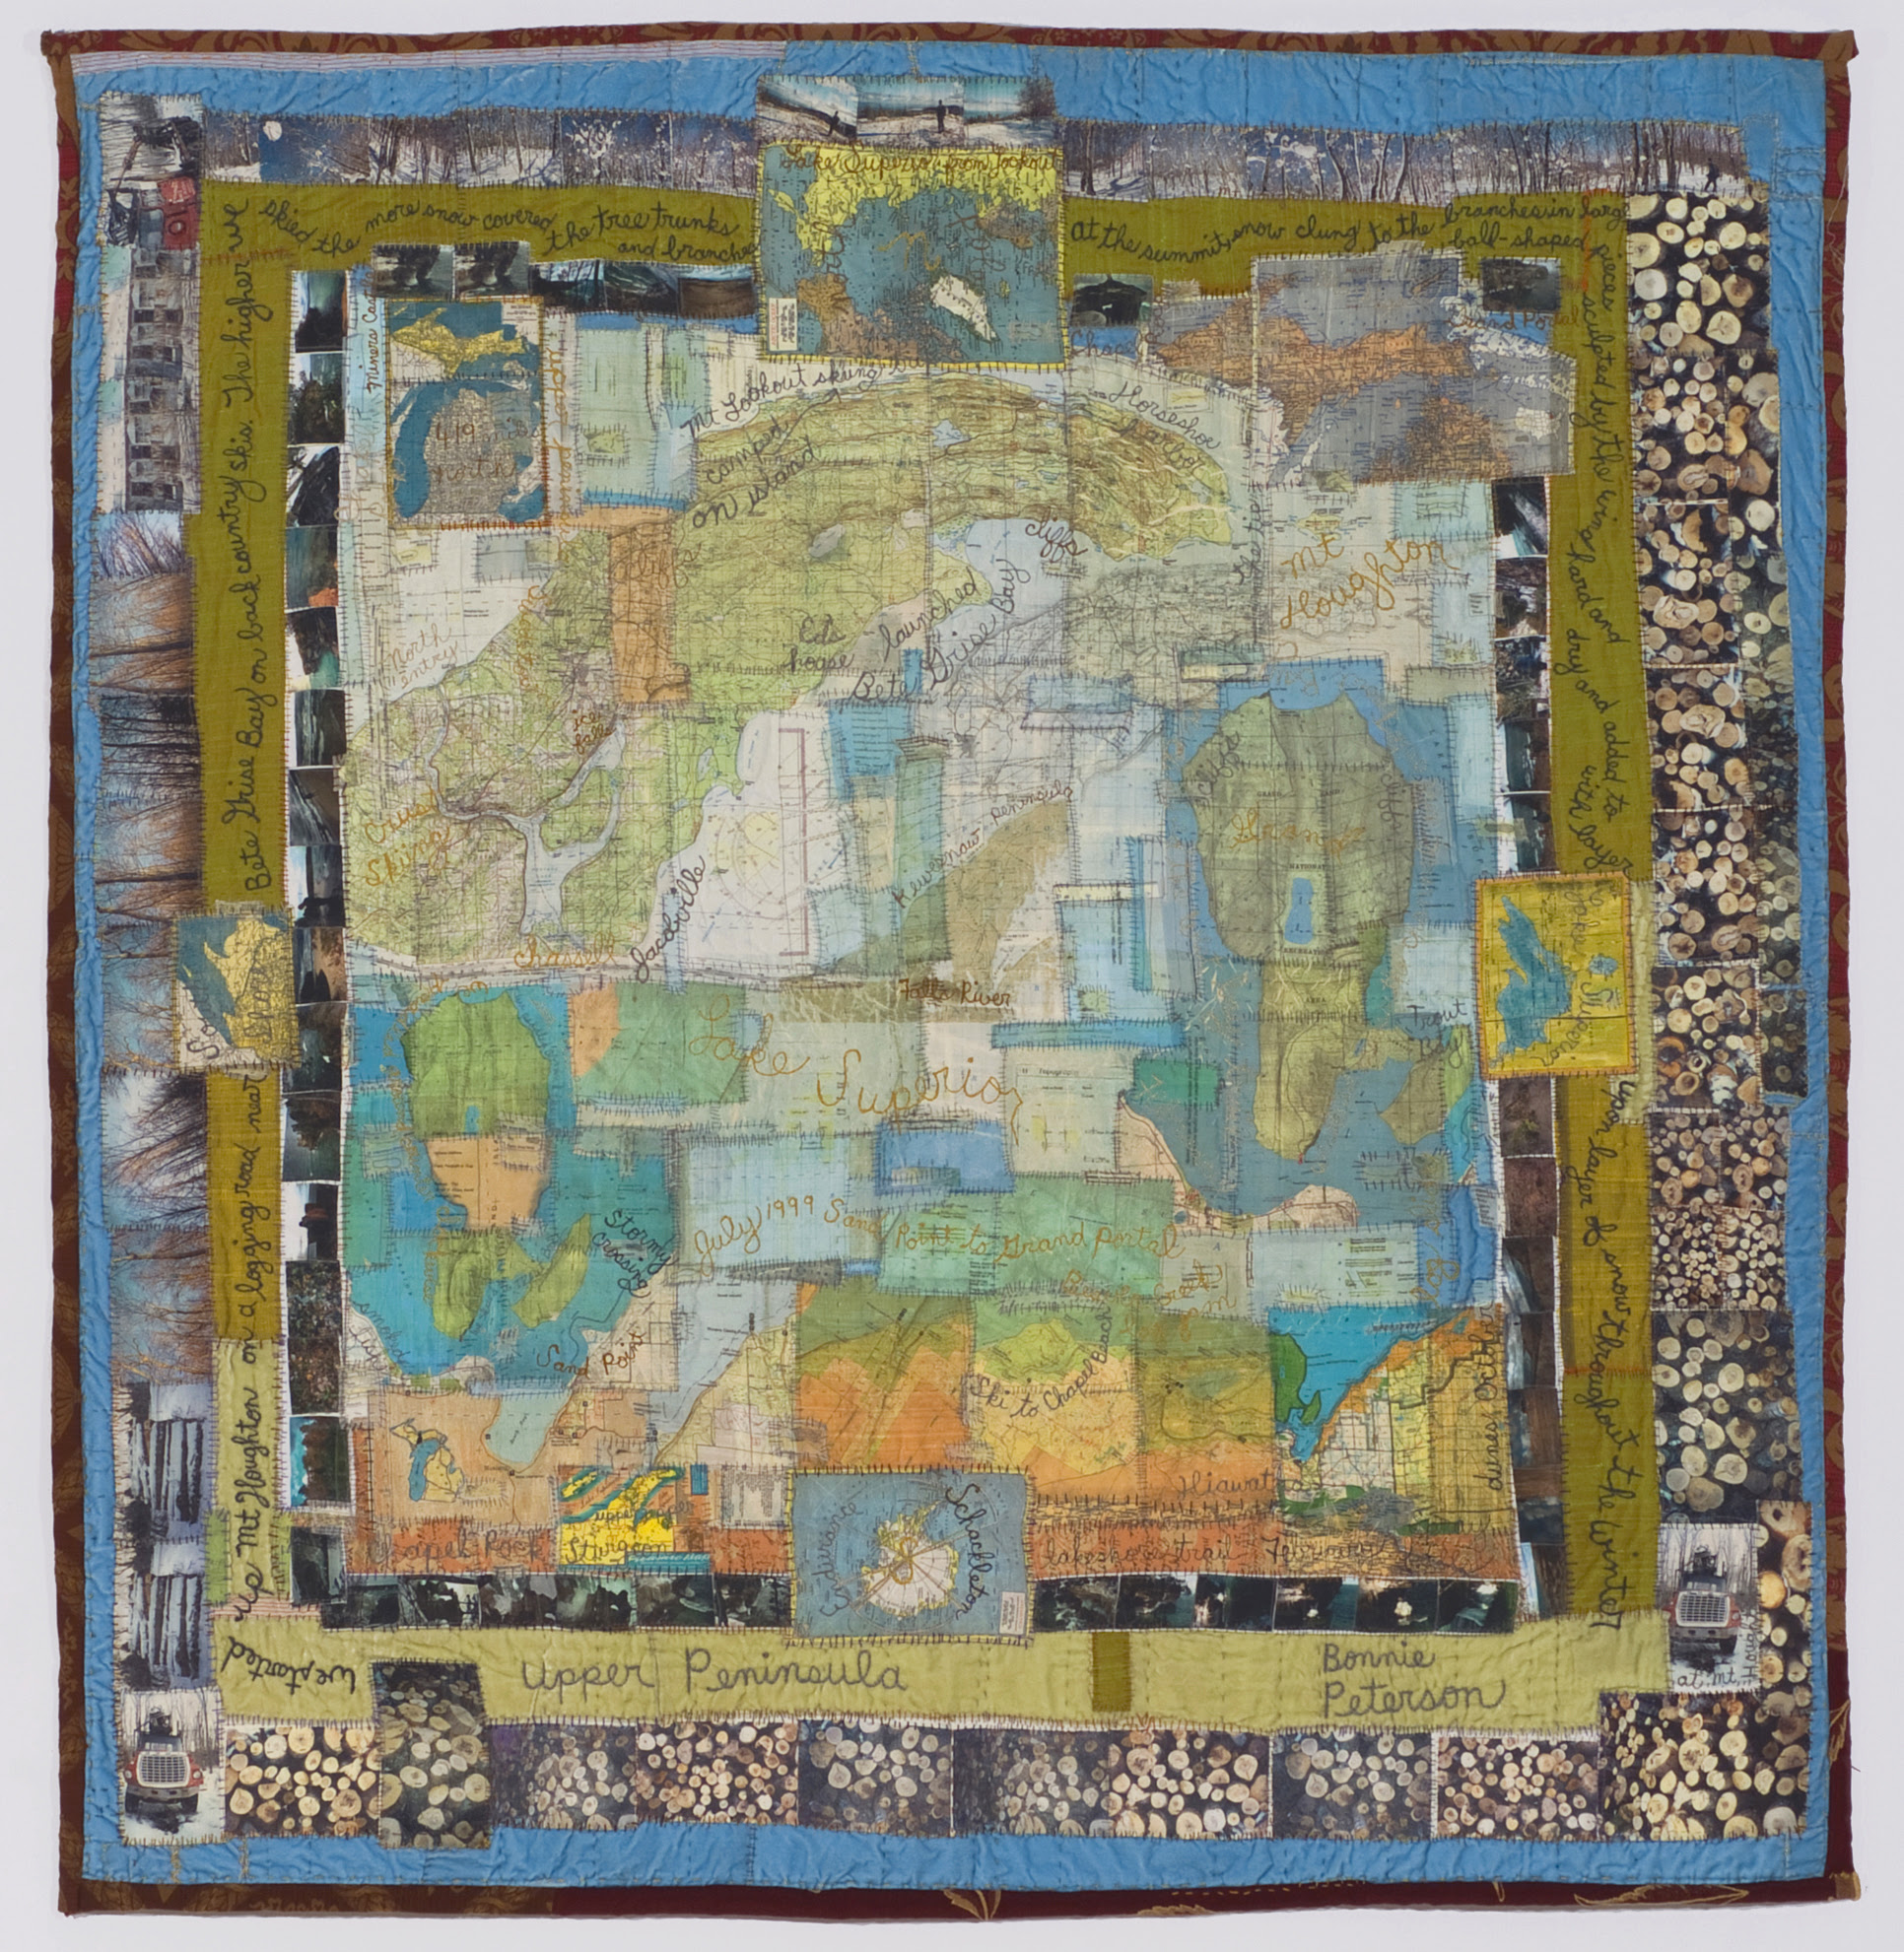 Bonnie Peterson, Upper Peninsula, 50" H x 48" W, Embroidery and heat transfers of upper Michigan and Lake Superior maps, painted and embroidered with stories from ski and kayak trips, photographs on silk, satin, velvet and brocade, stitched.